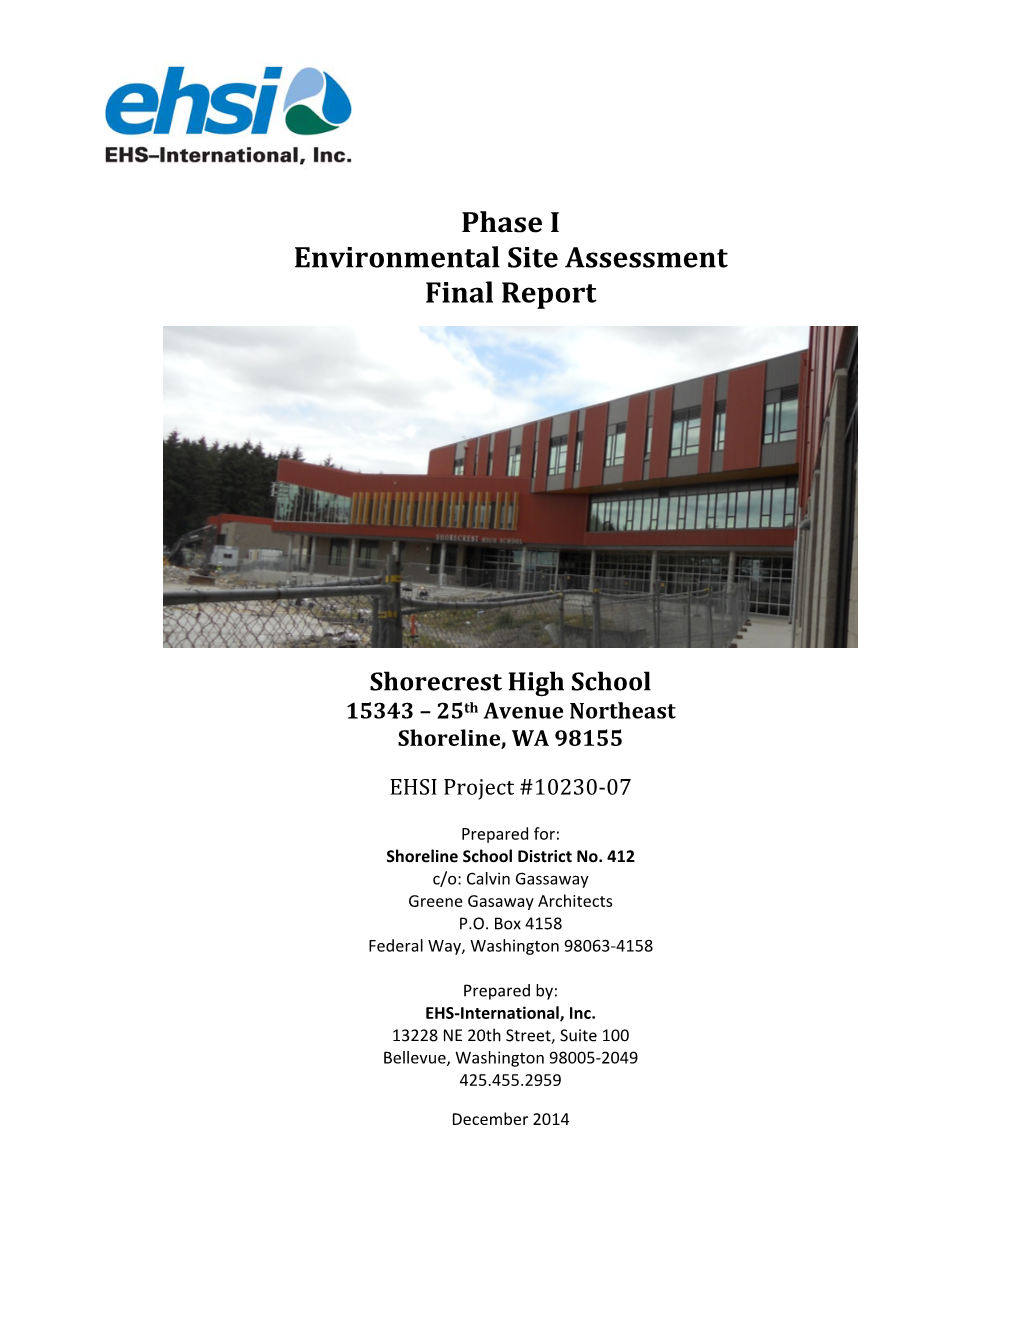 Phase I Environmental Site Assessment Final Report